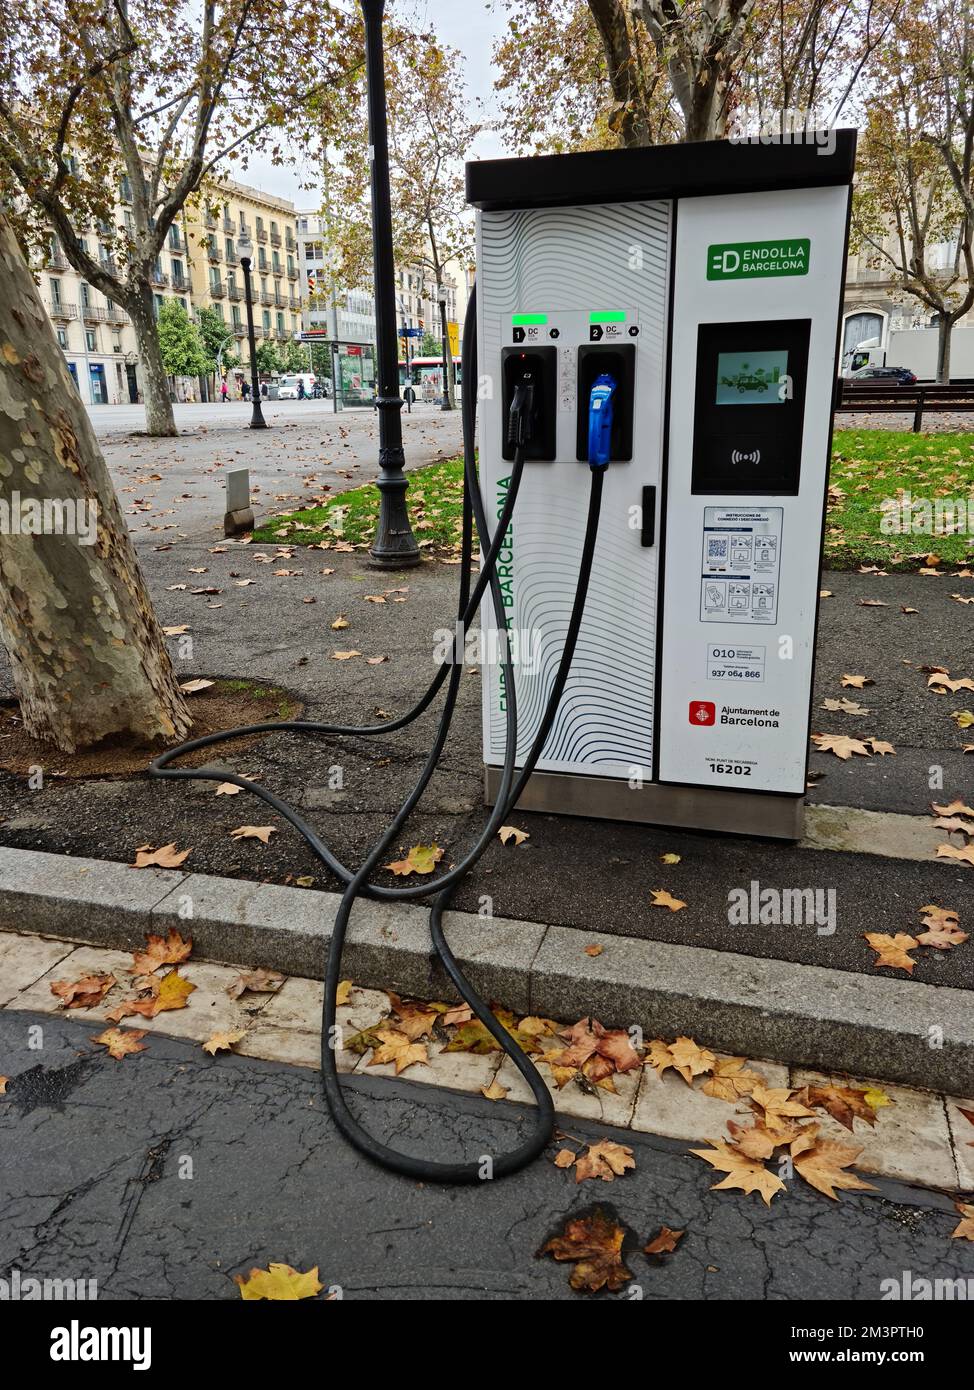 Electric vehicle charging point station. Barcelona, Catalonai, Spain